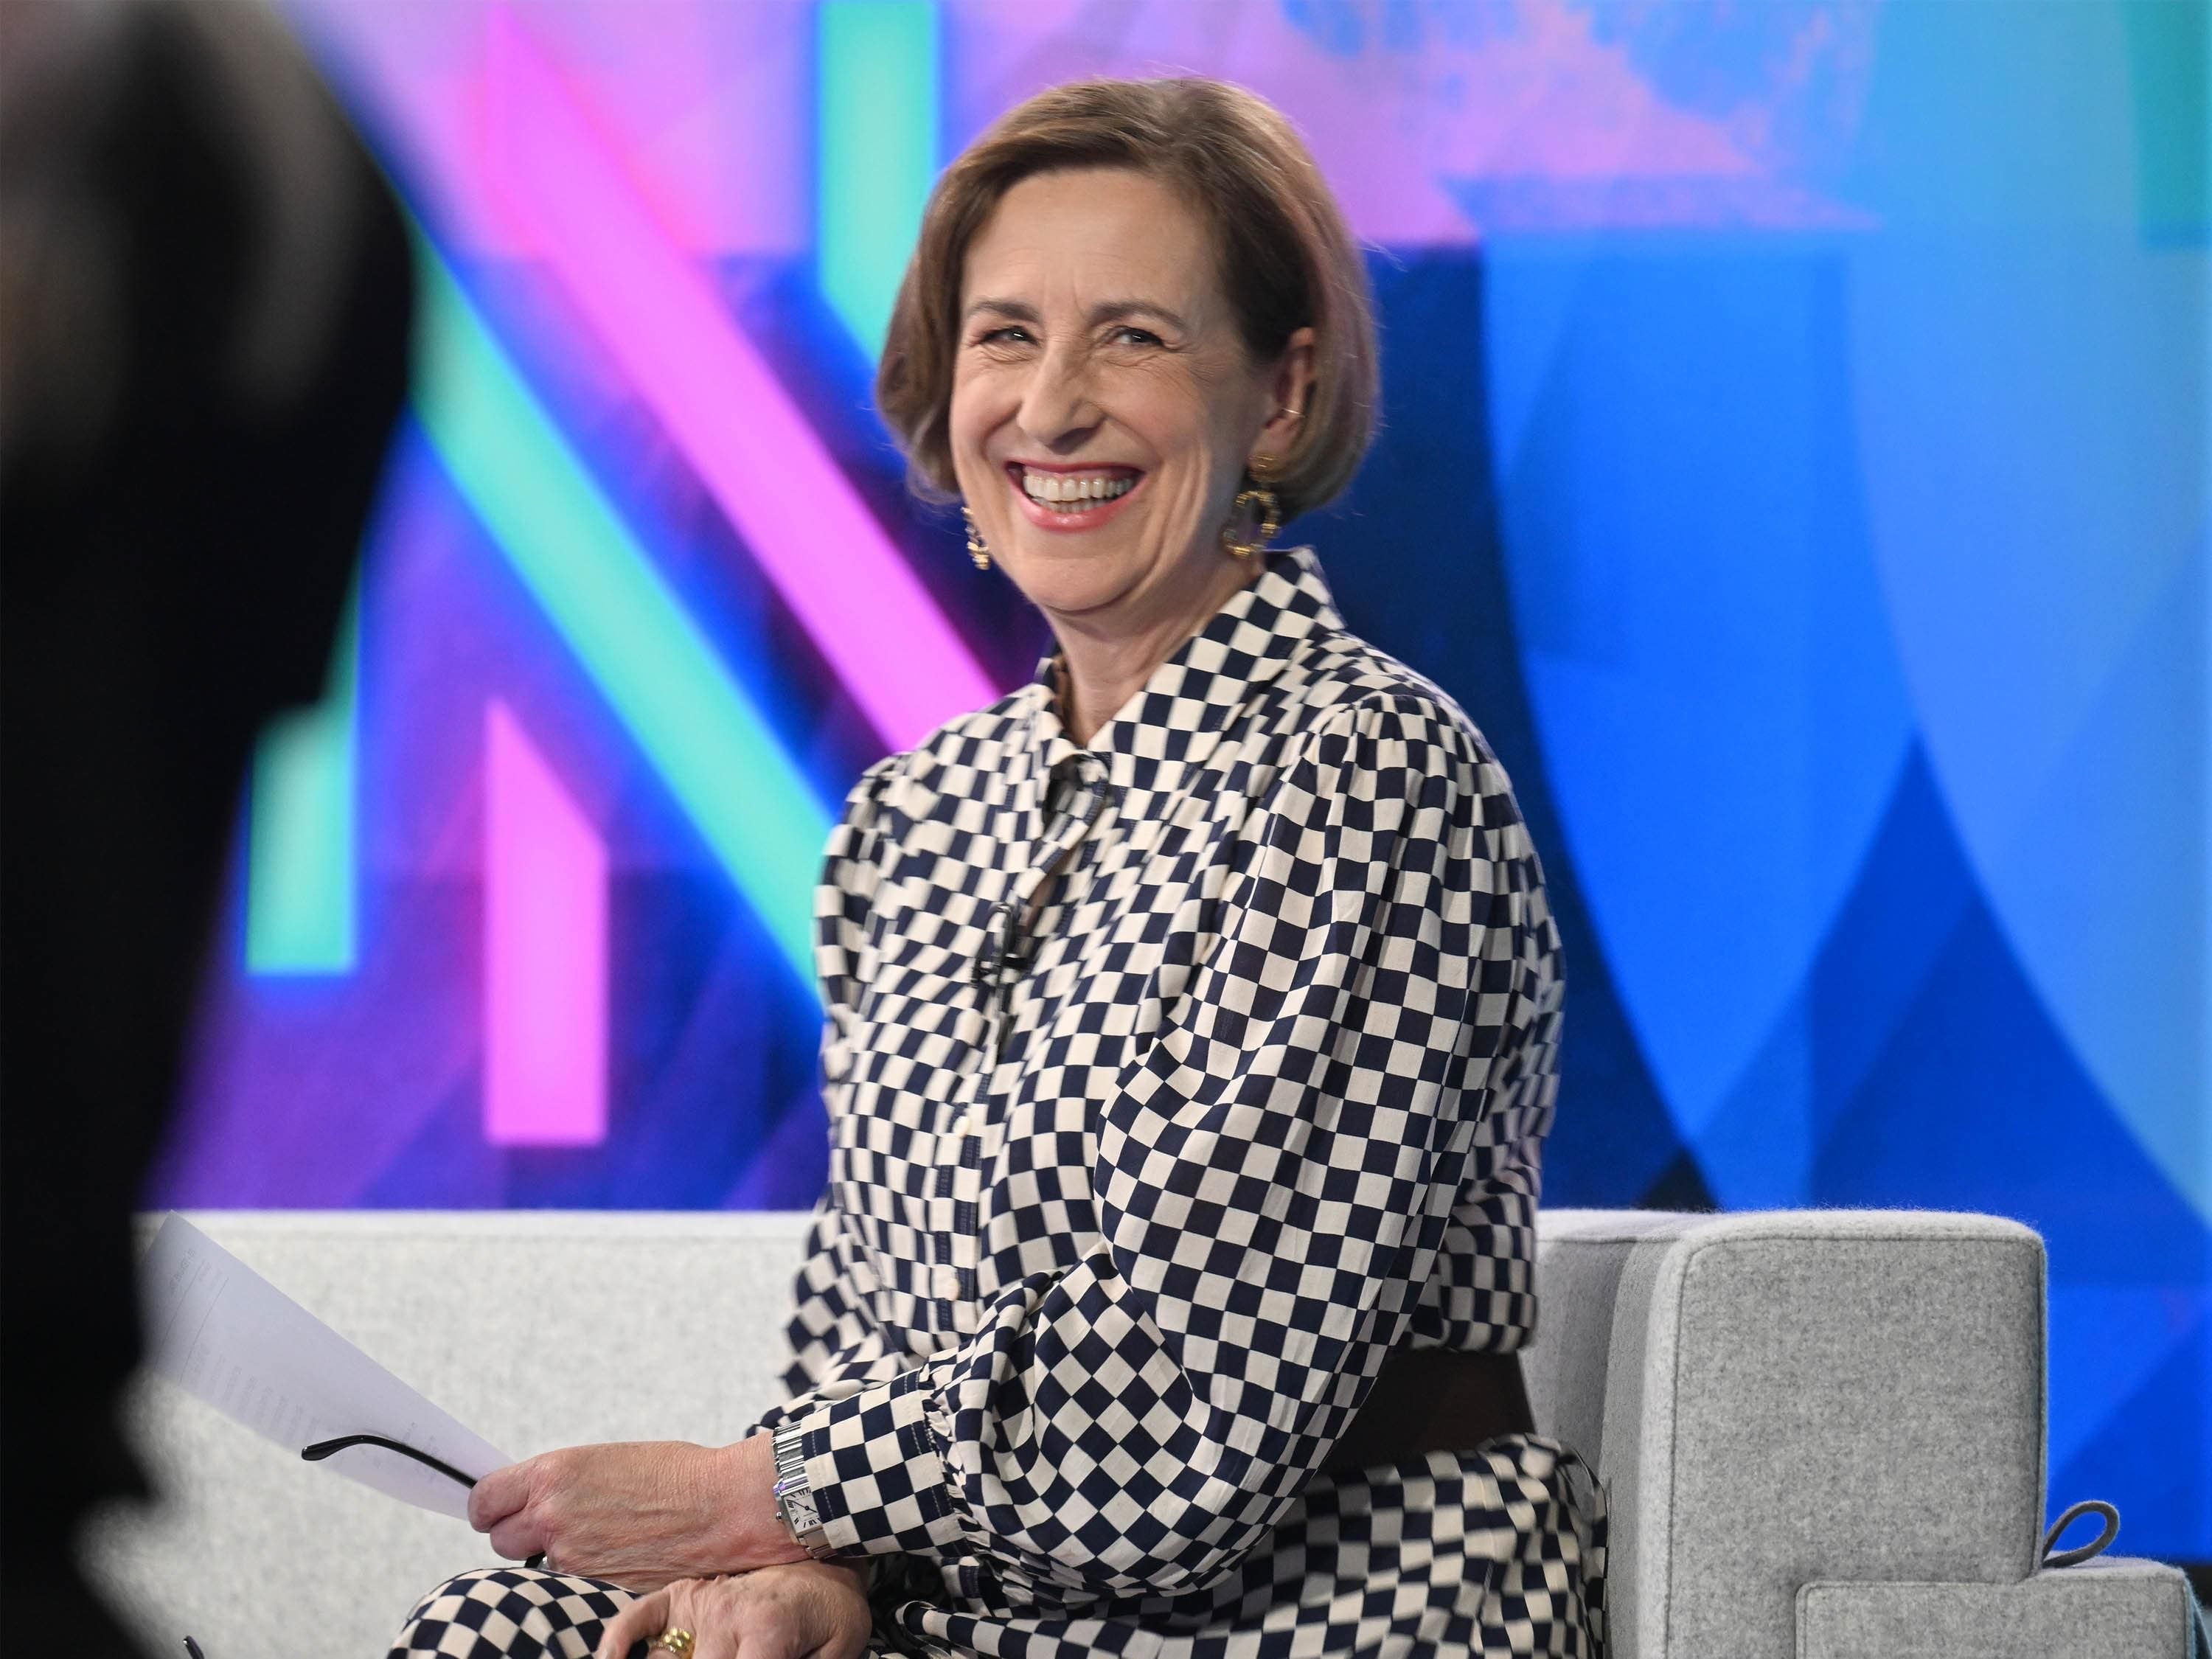 Former PMs thank Kirsty Wark for ‘terrifying’ them as she hosts final Newsnight